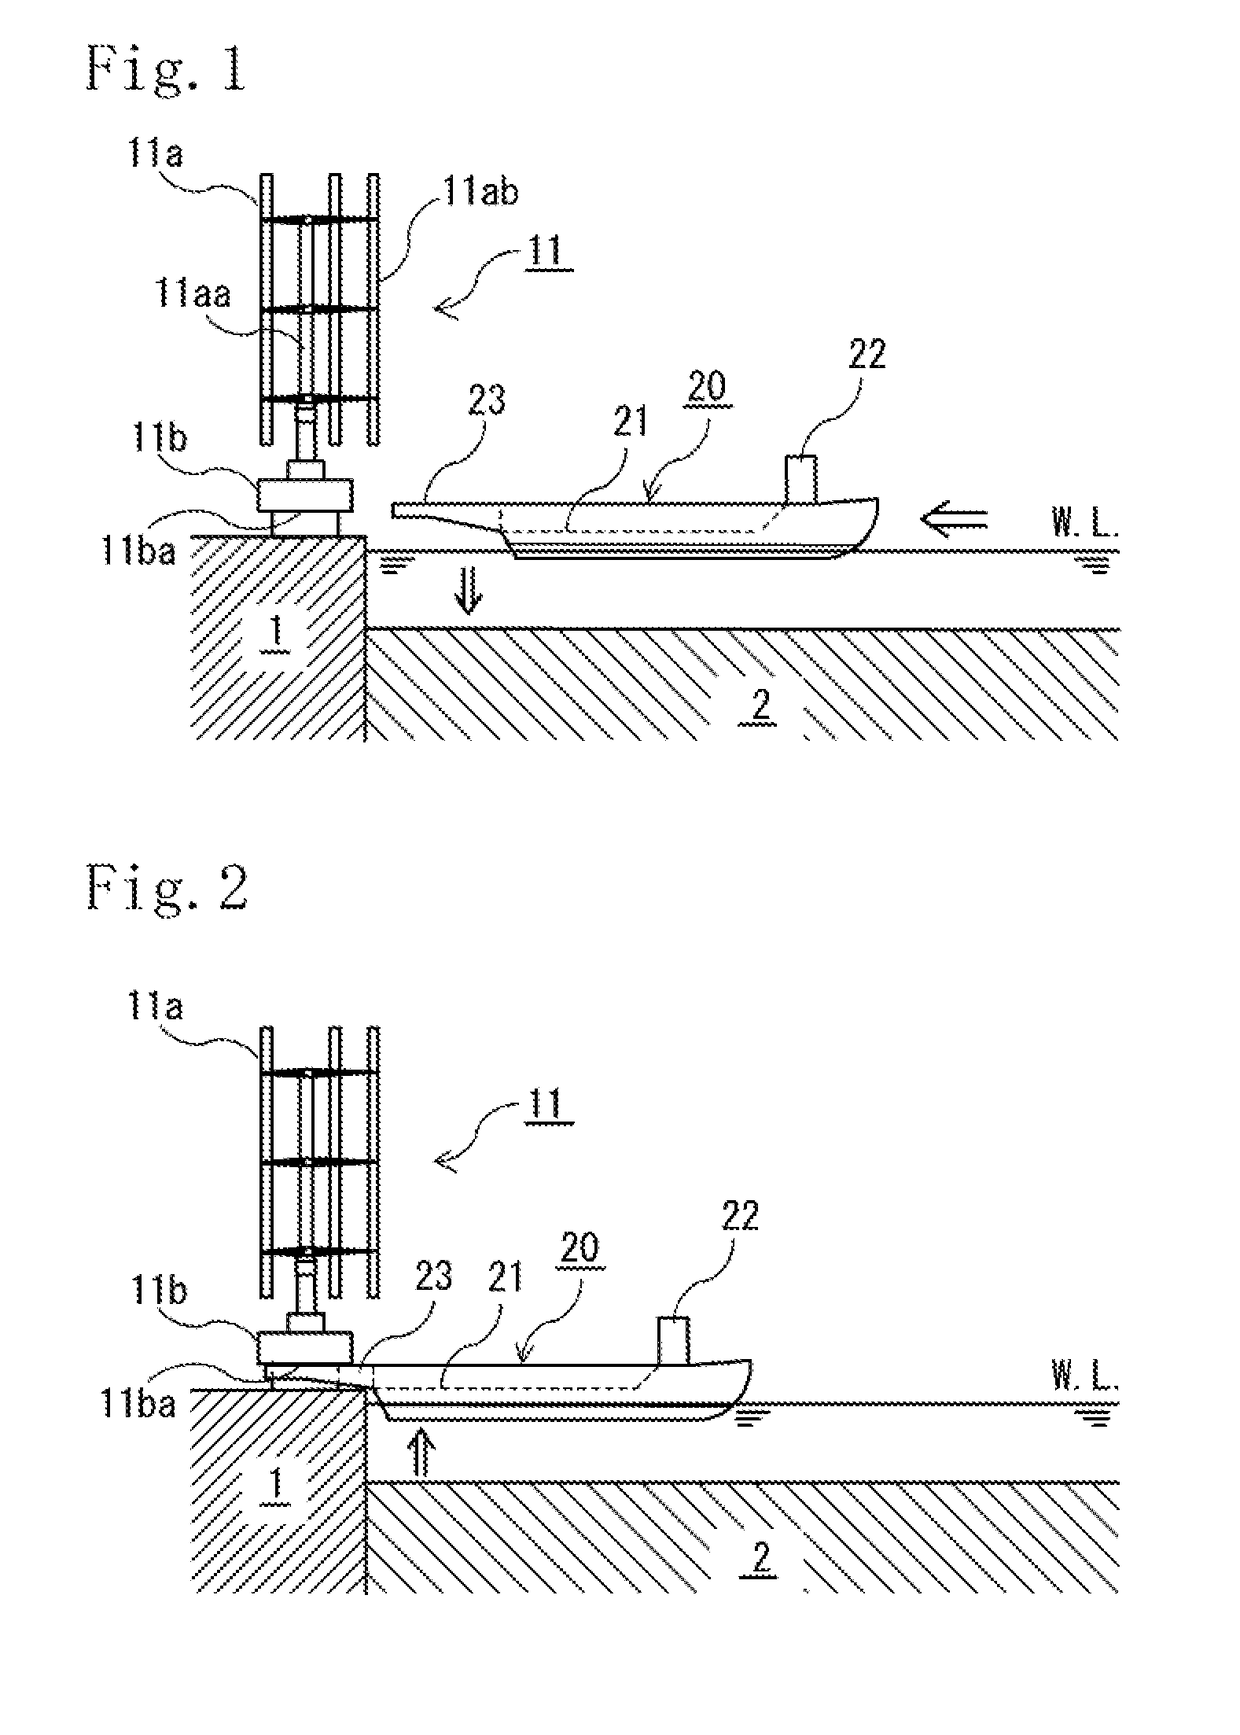 Method of constructing an offshore structure, and offshore structure